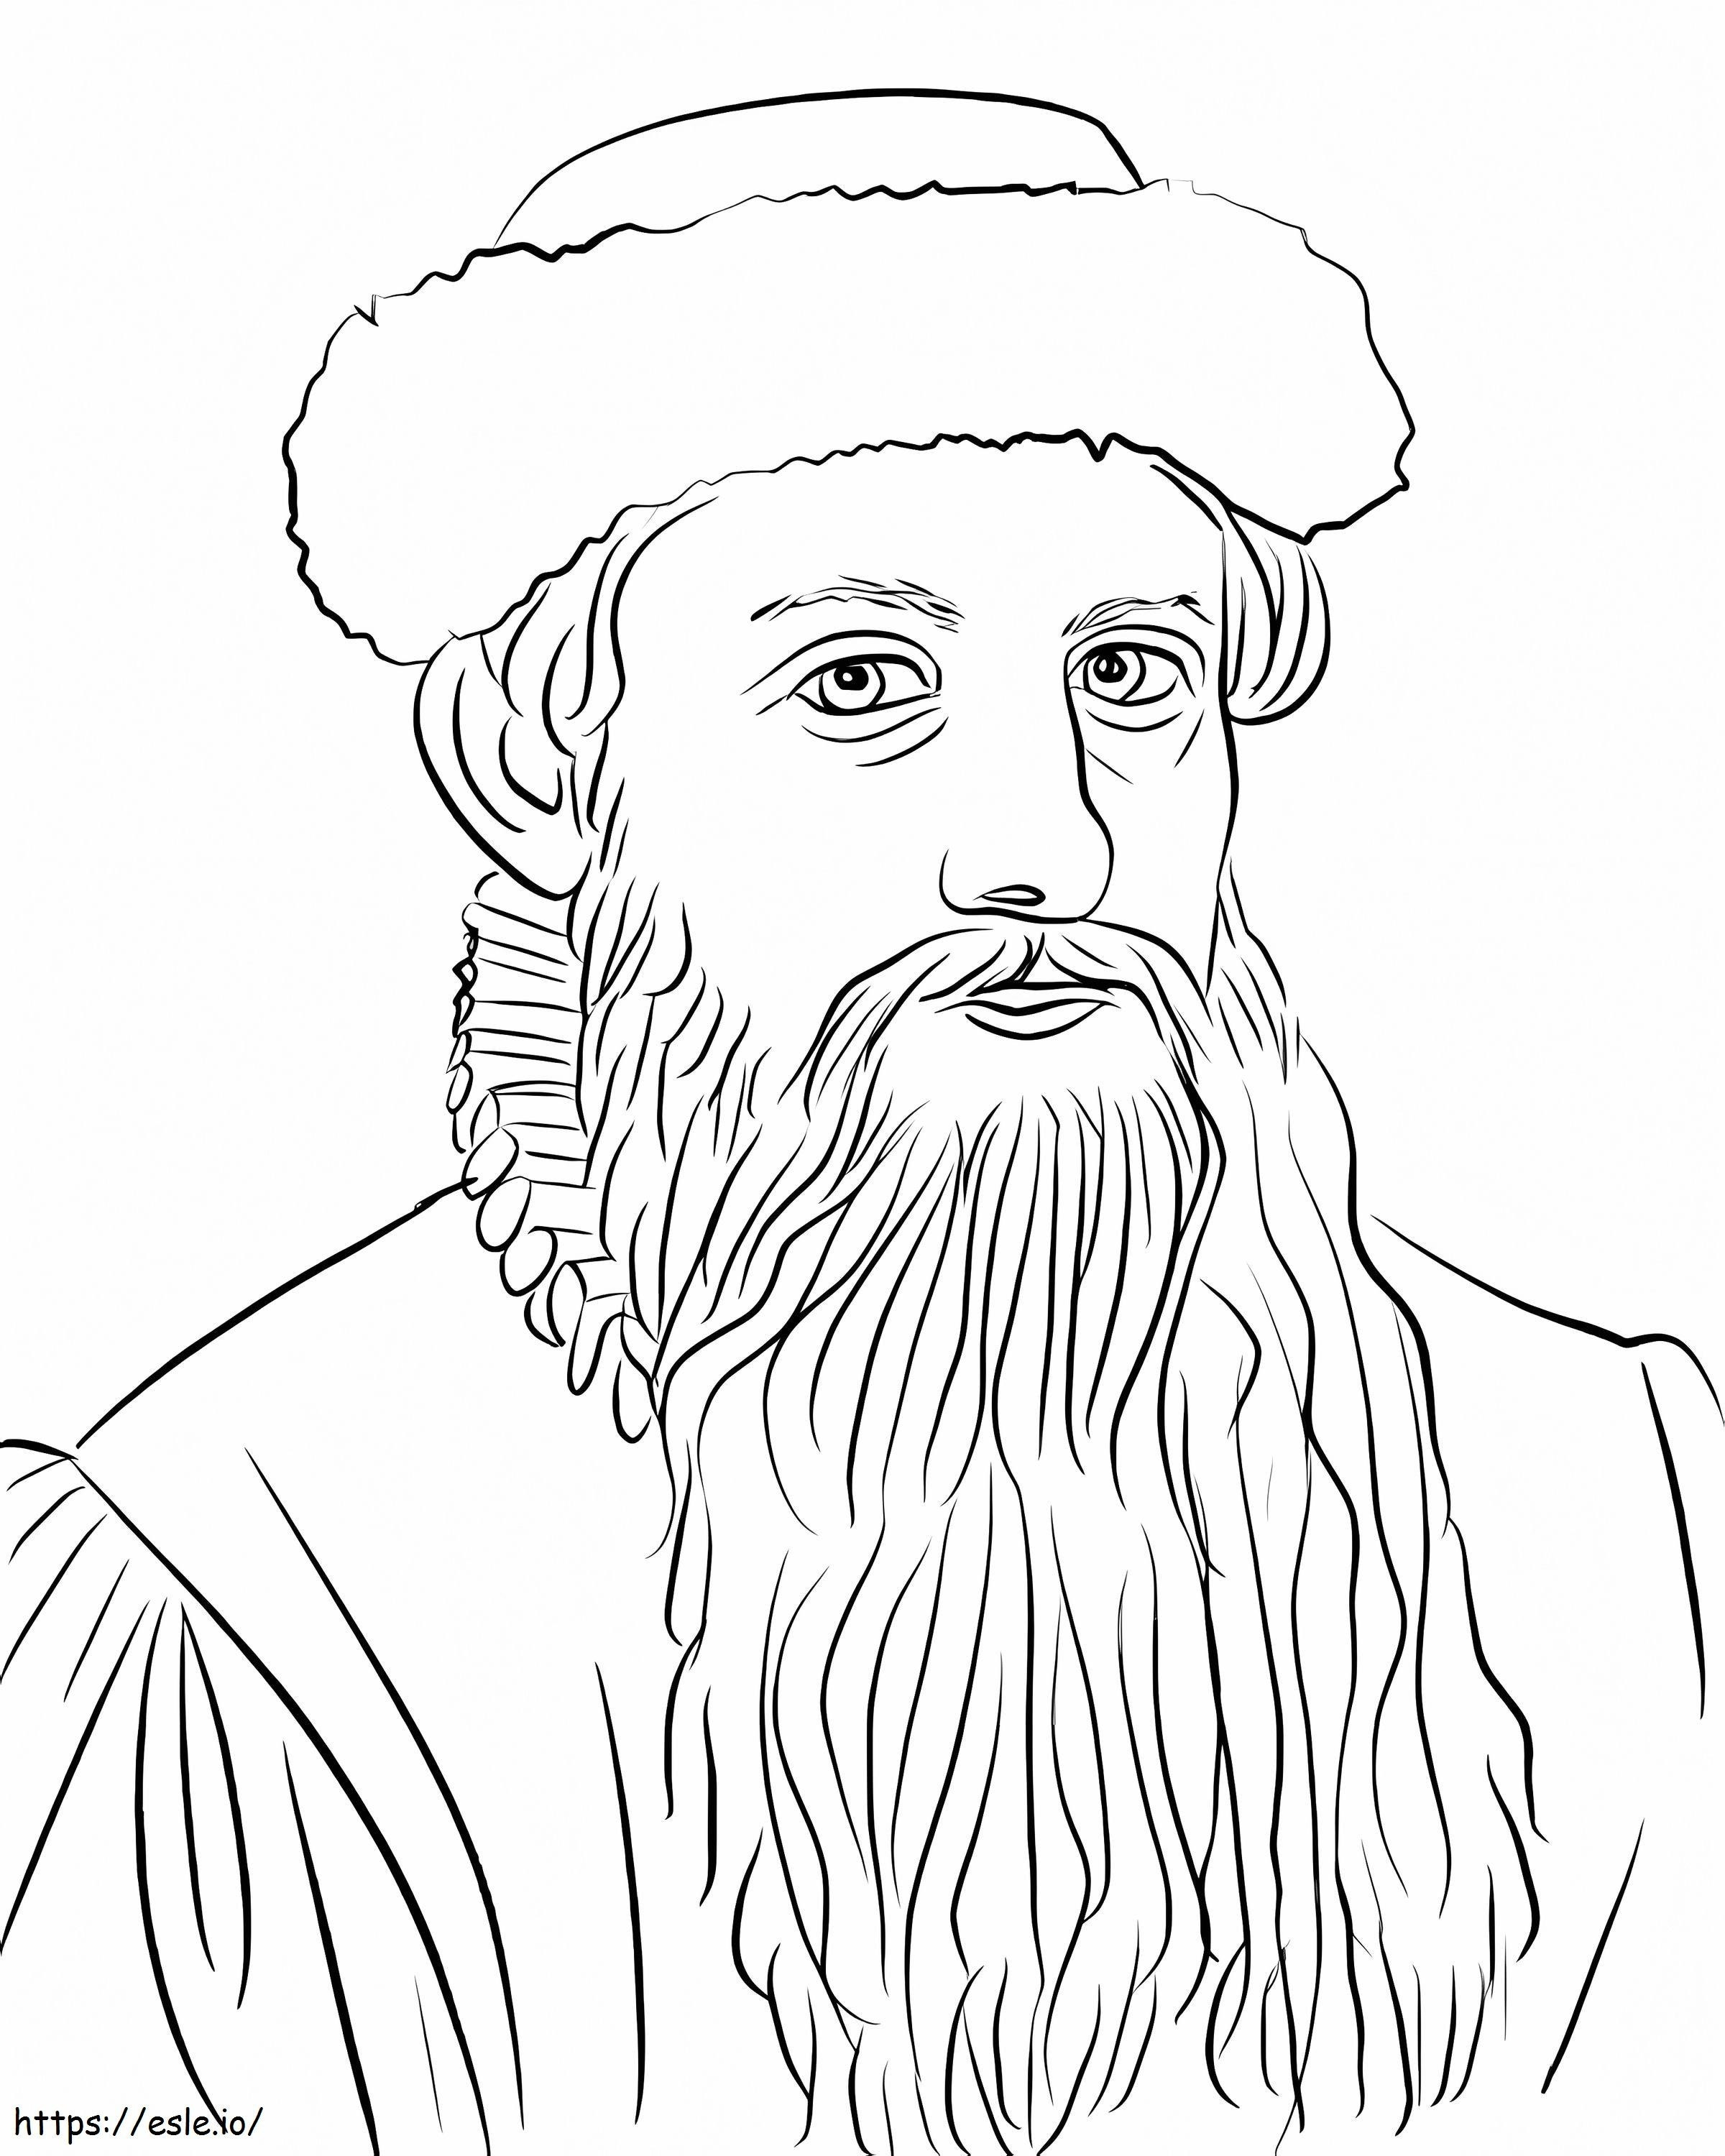 Official Johannes Gutenberg coloring page